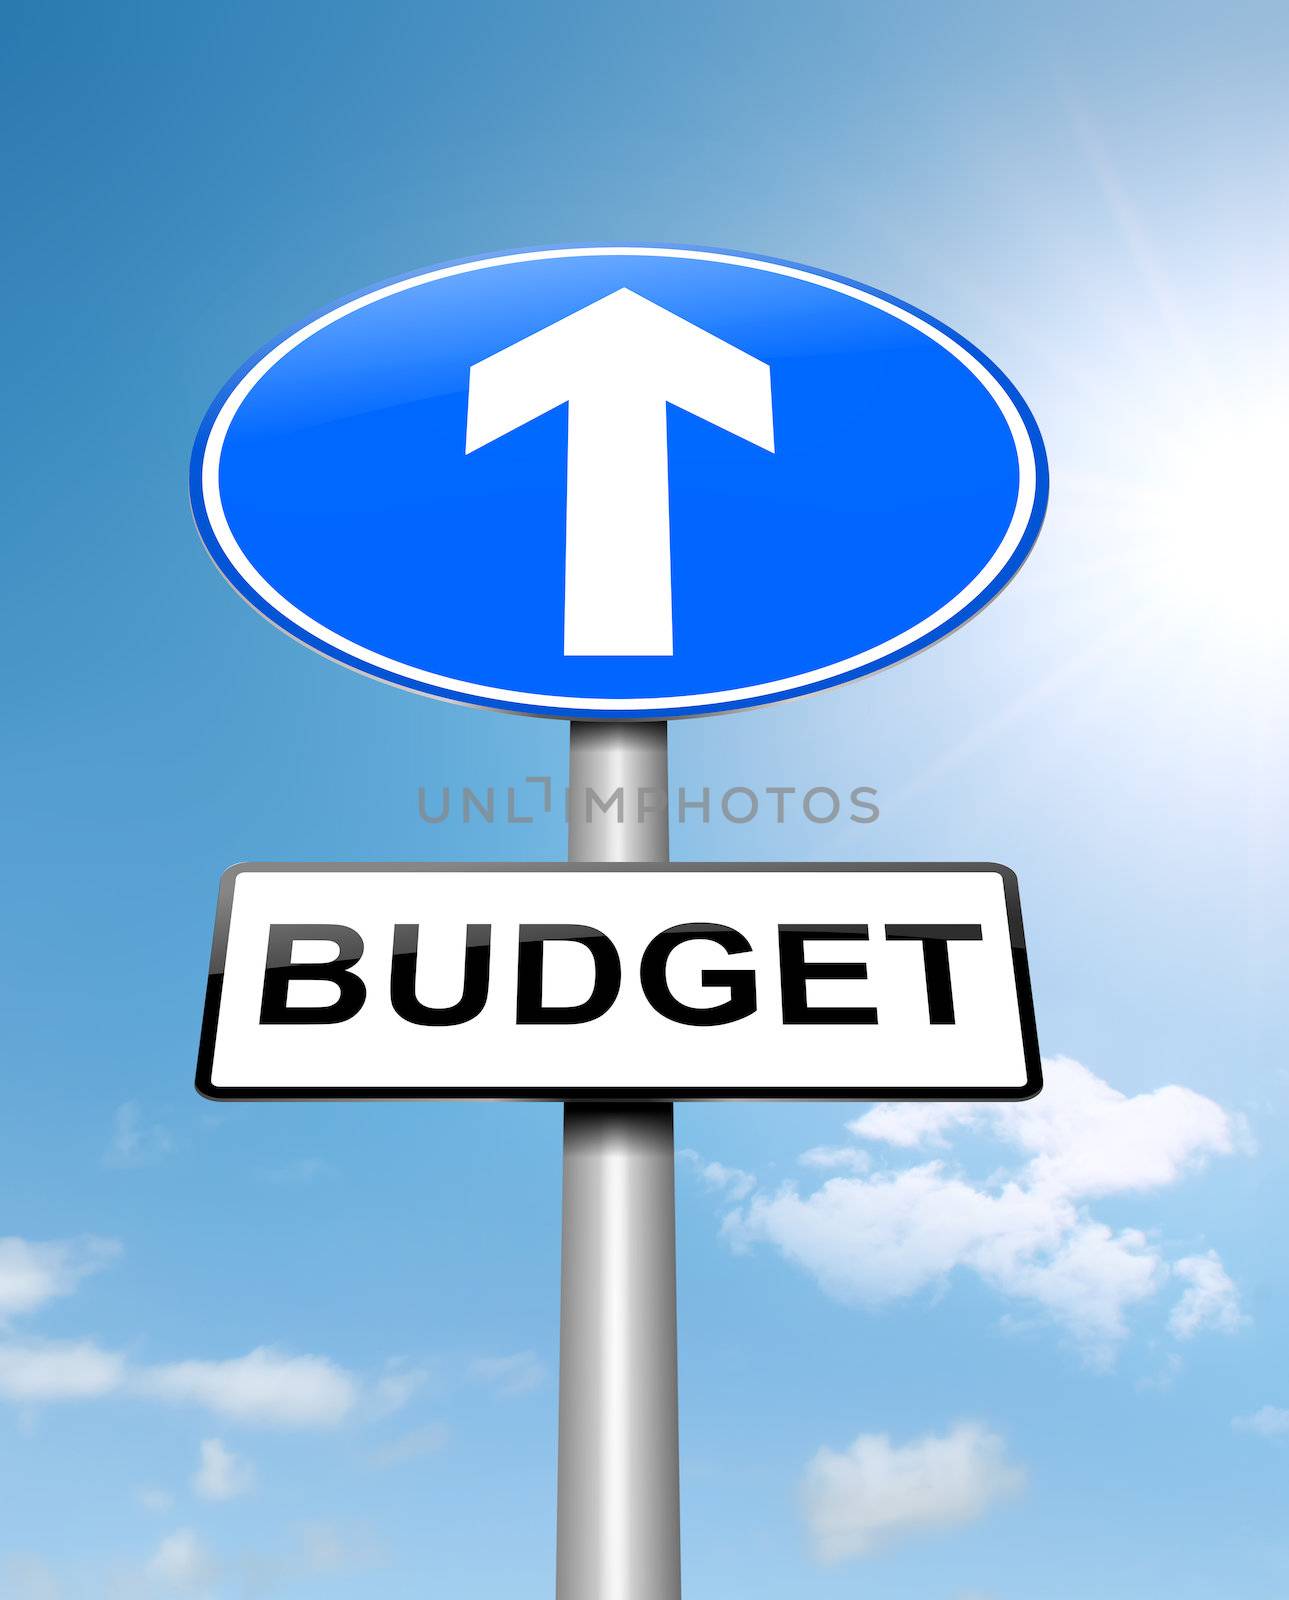 Illustration depicting a roadsign with a budget concept. Sky background.